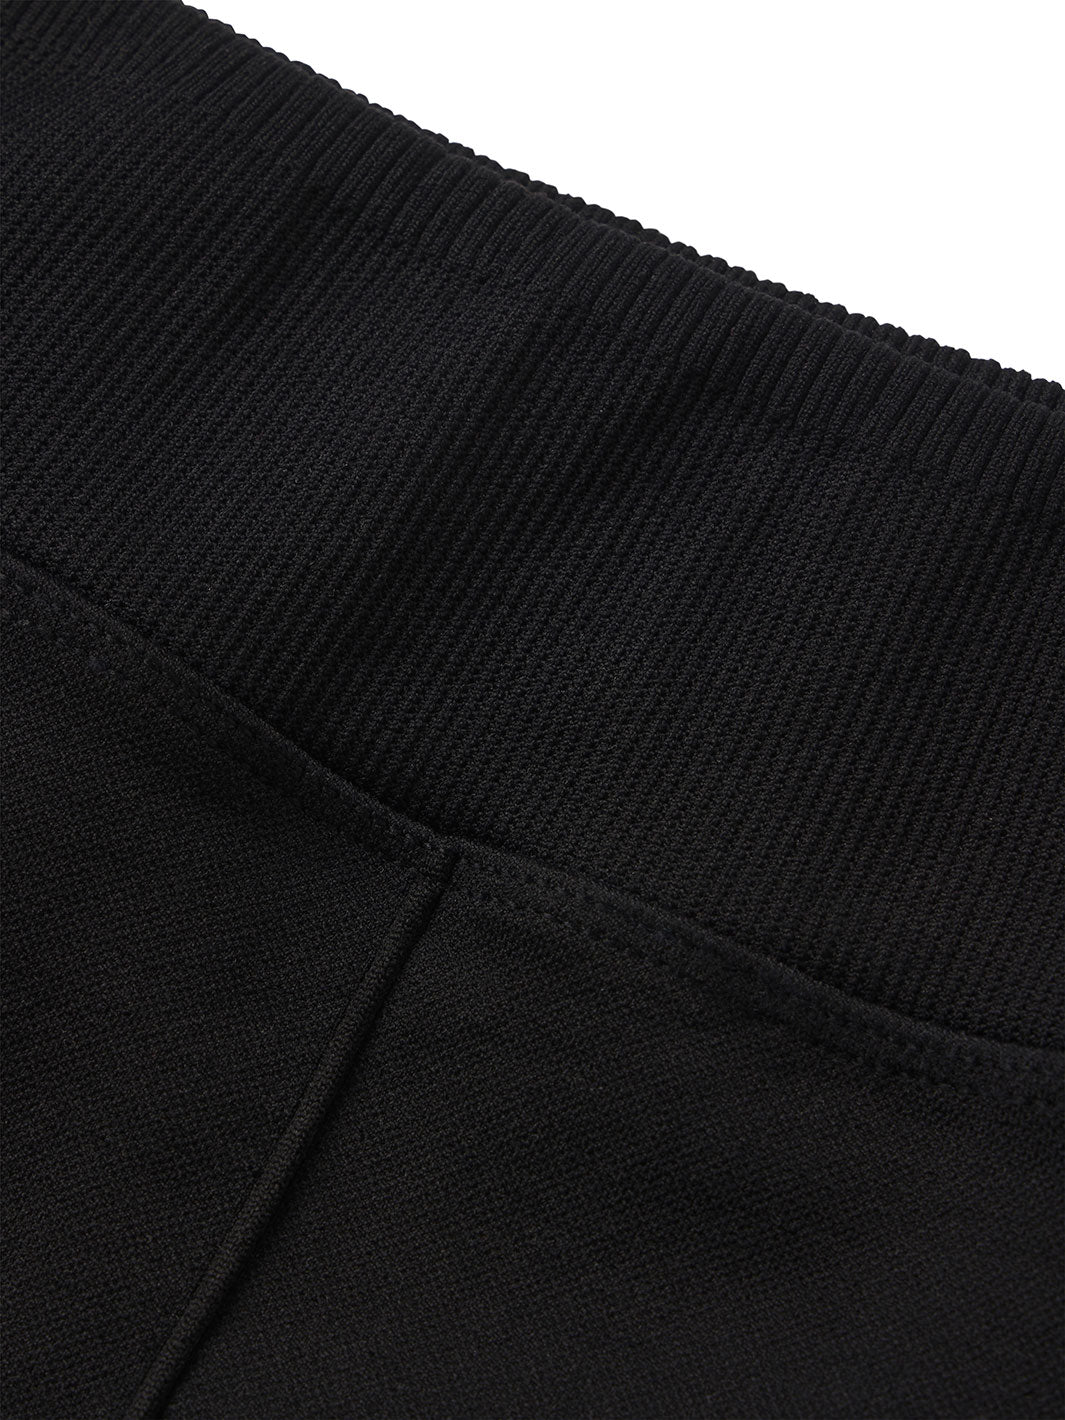 Close-up of the high-quality fabric and stretch waistband of PB5star's women's black Compression Shorts, emphasizing the durable construction and comfort for optimal pickleball performance.